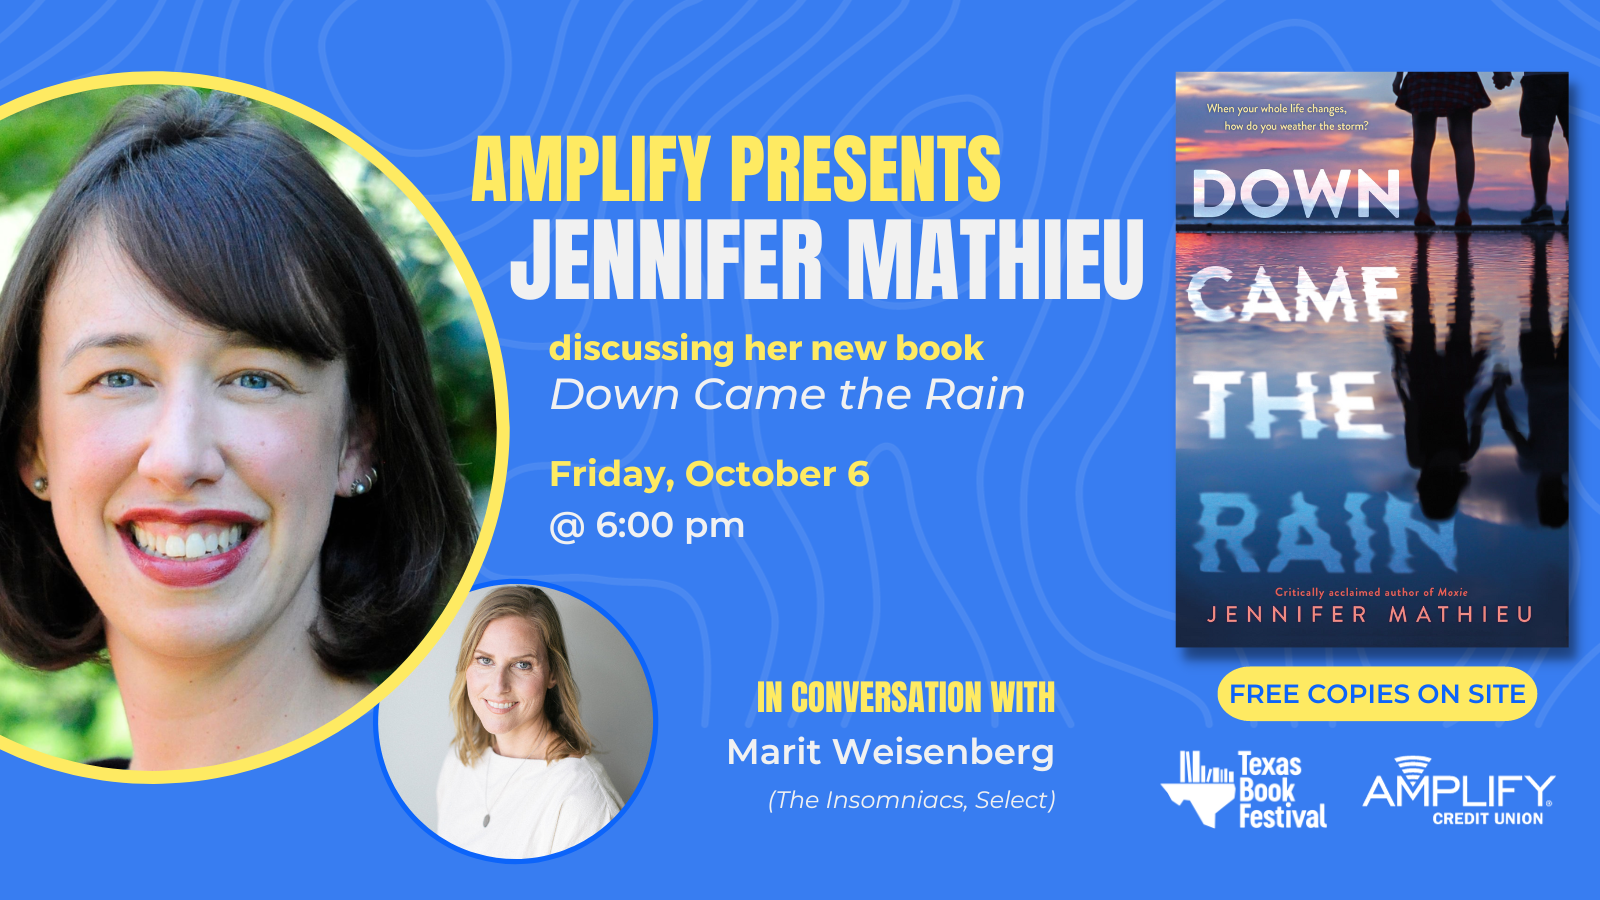 Jennifer Mathieu discussing Down Came the Rain with Marit Weisenberg